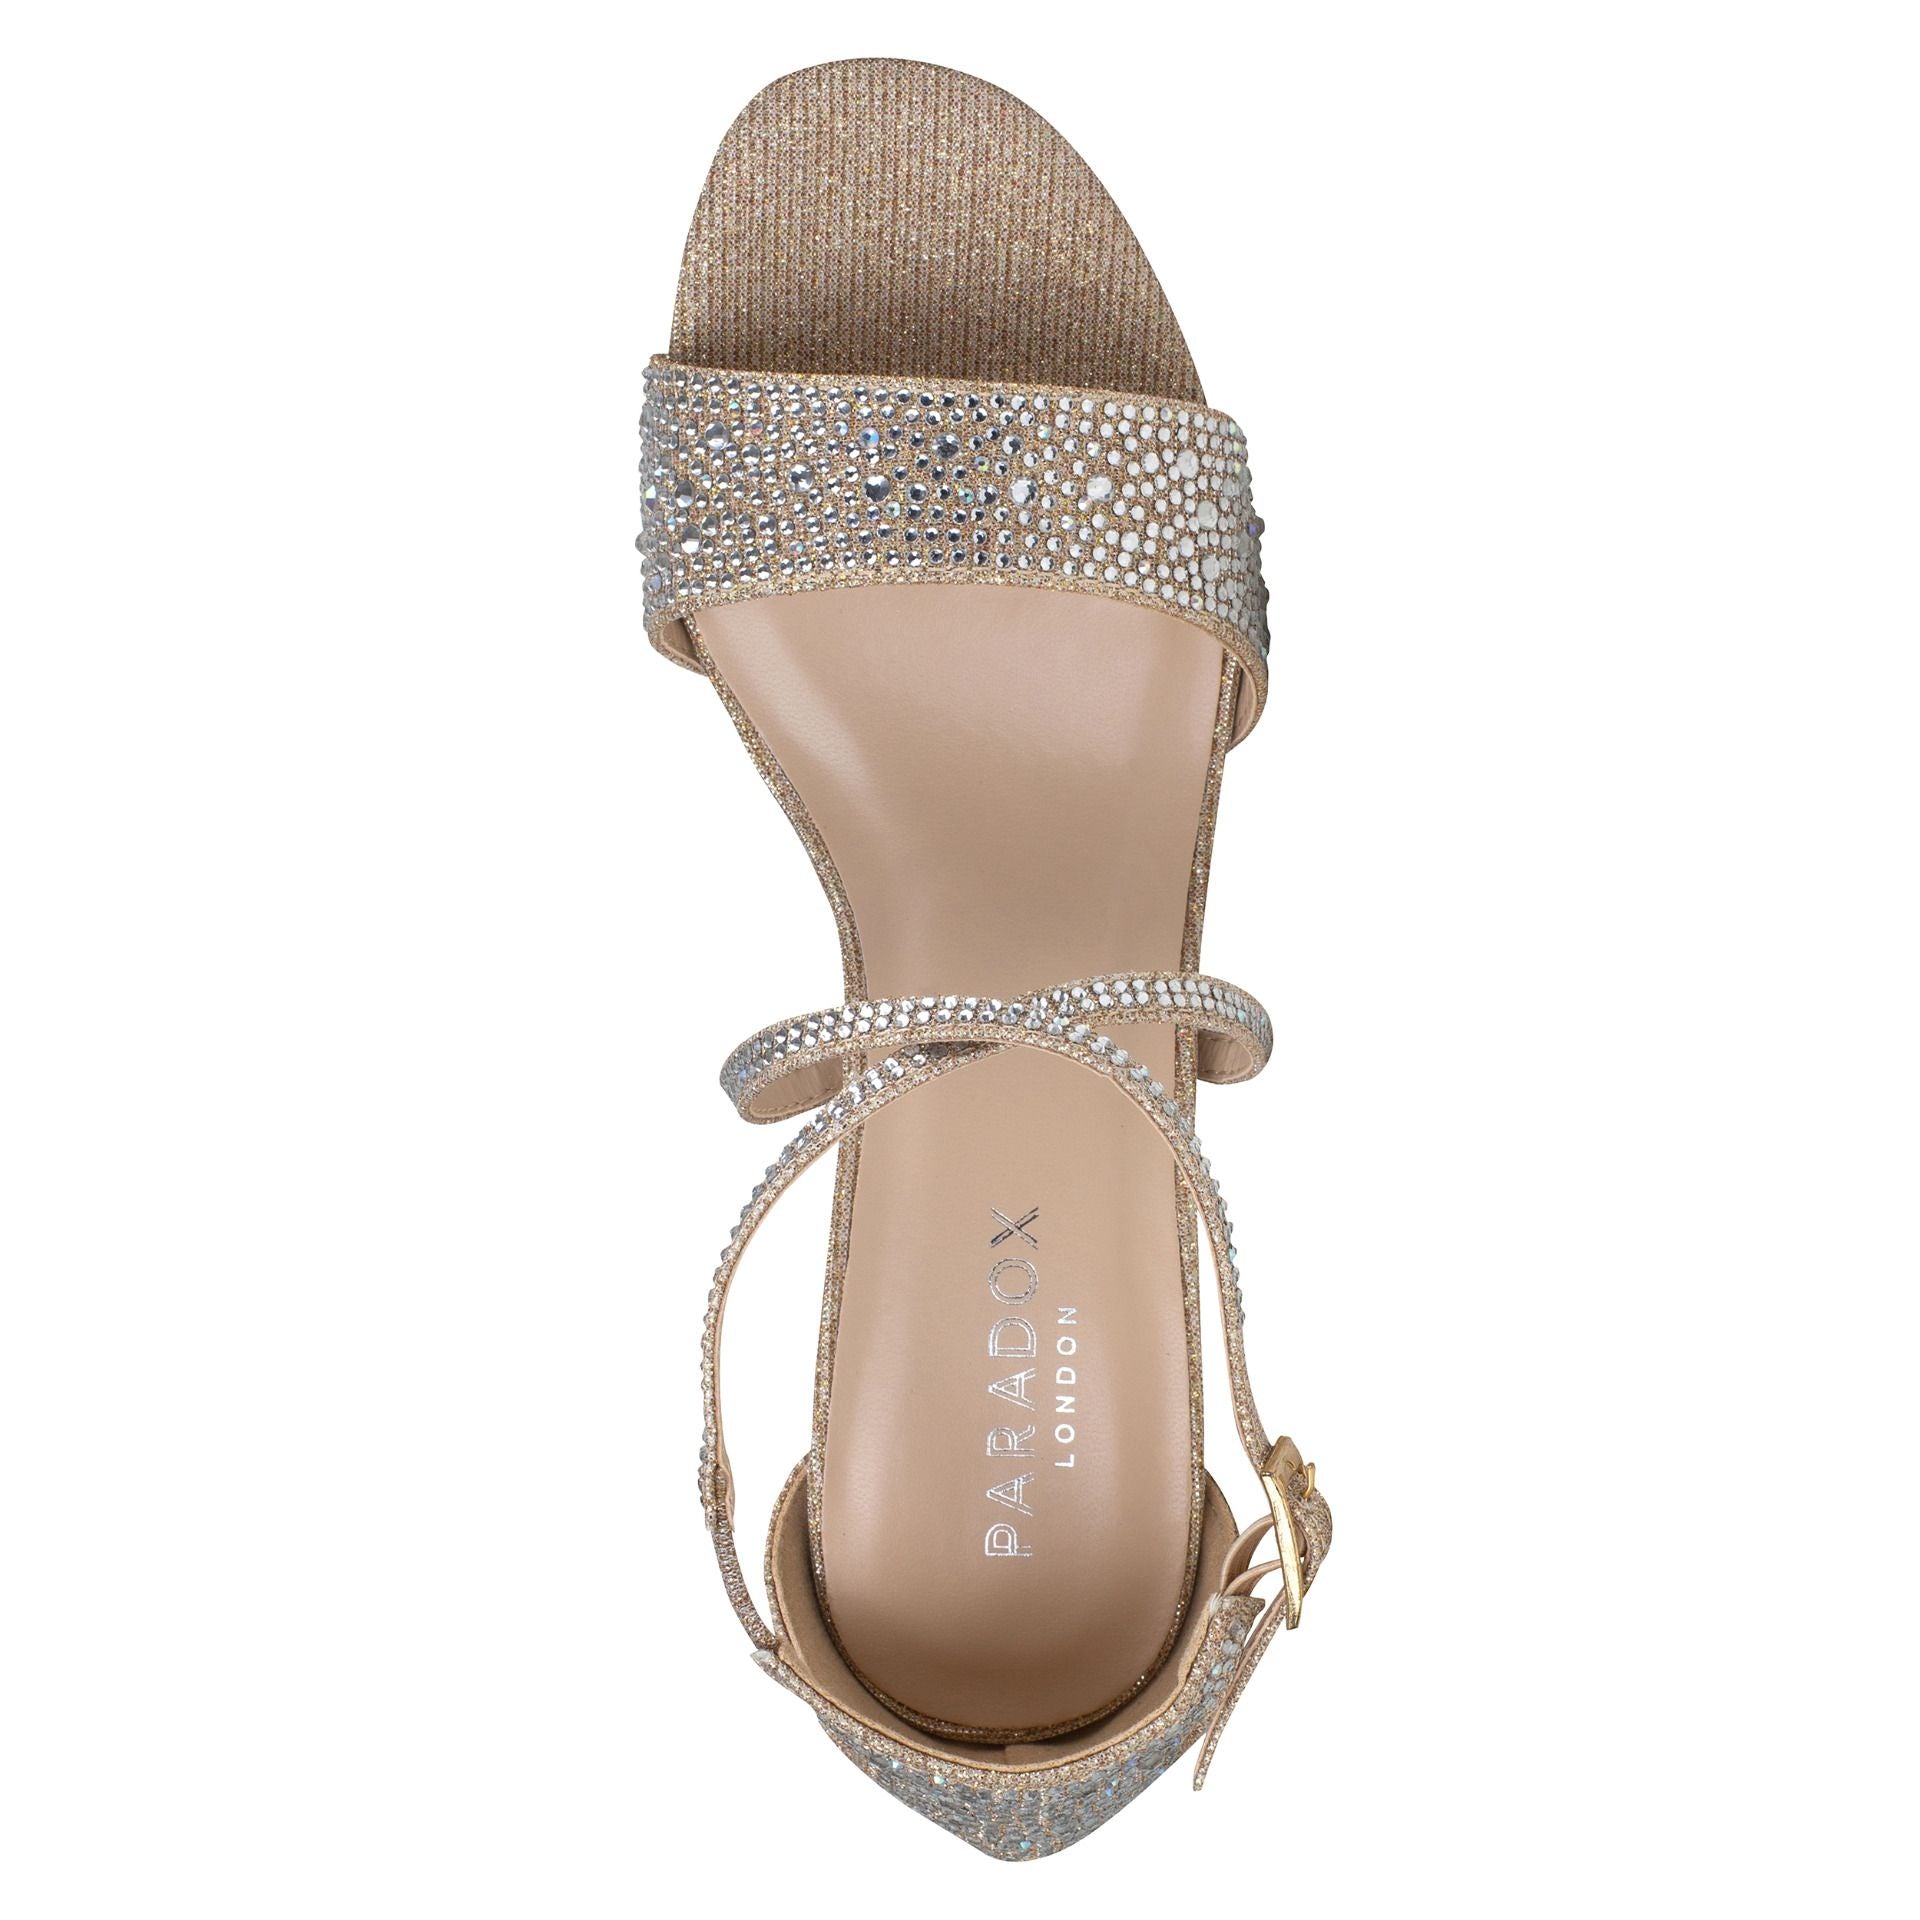 Overhead view of Metallic champage and rhinestone shoe with 2" block heel and criss cross straps